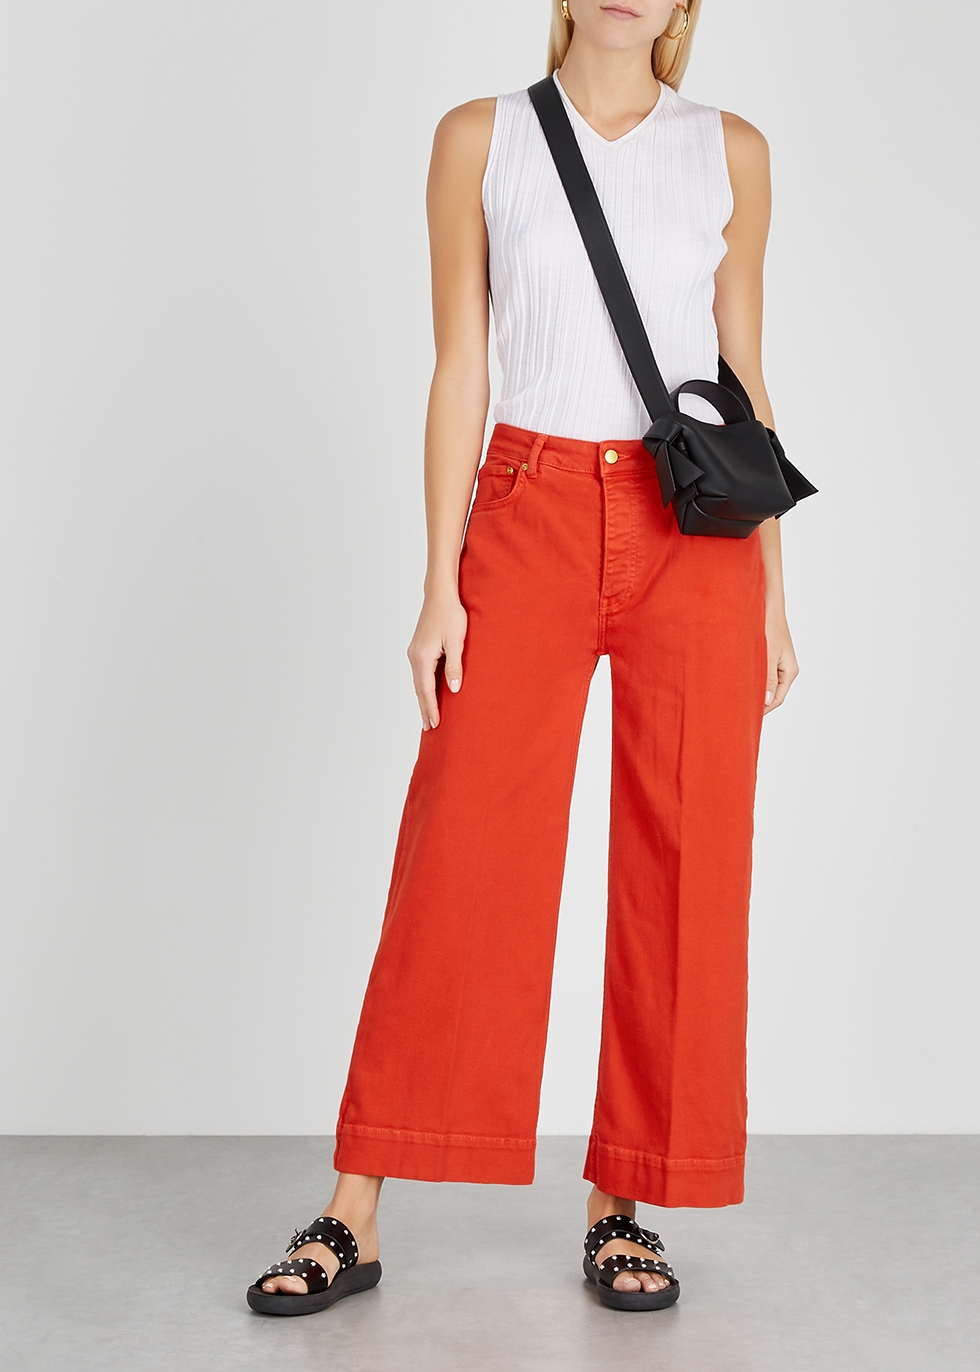 Red cropped wide-leg jeans - Victoria, Victoria Beckham